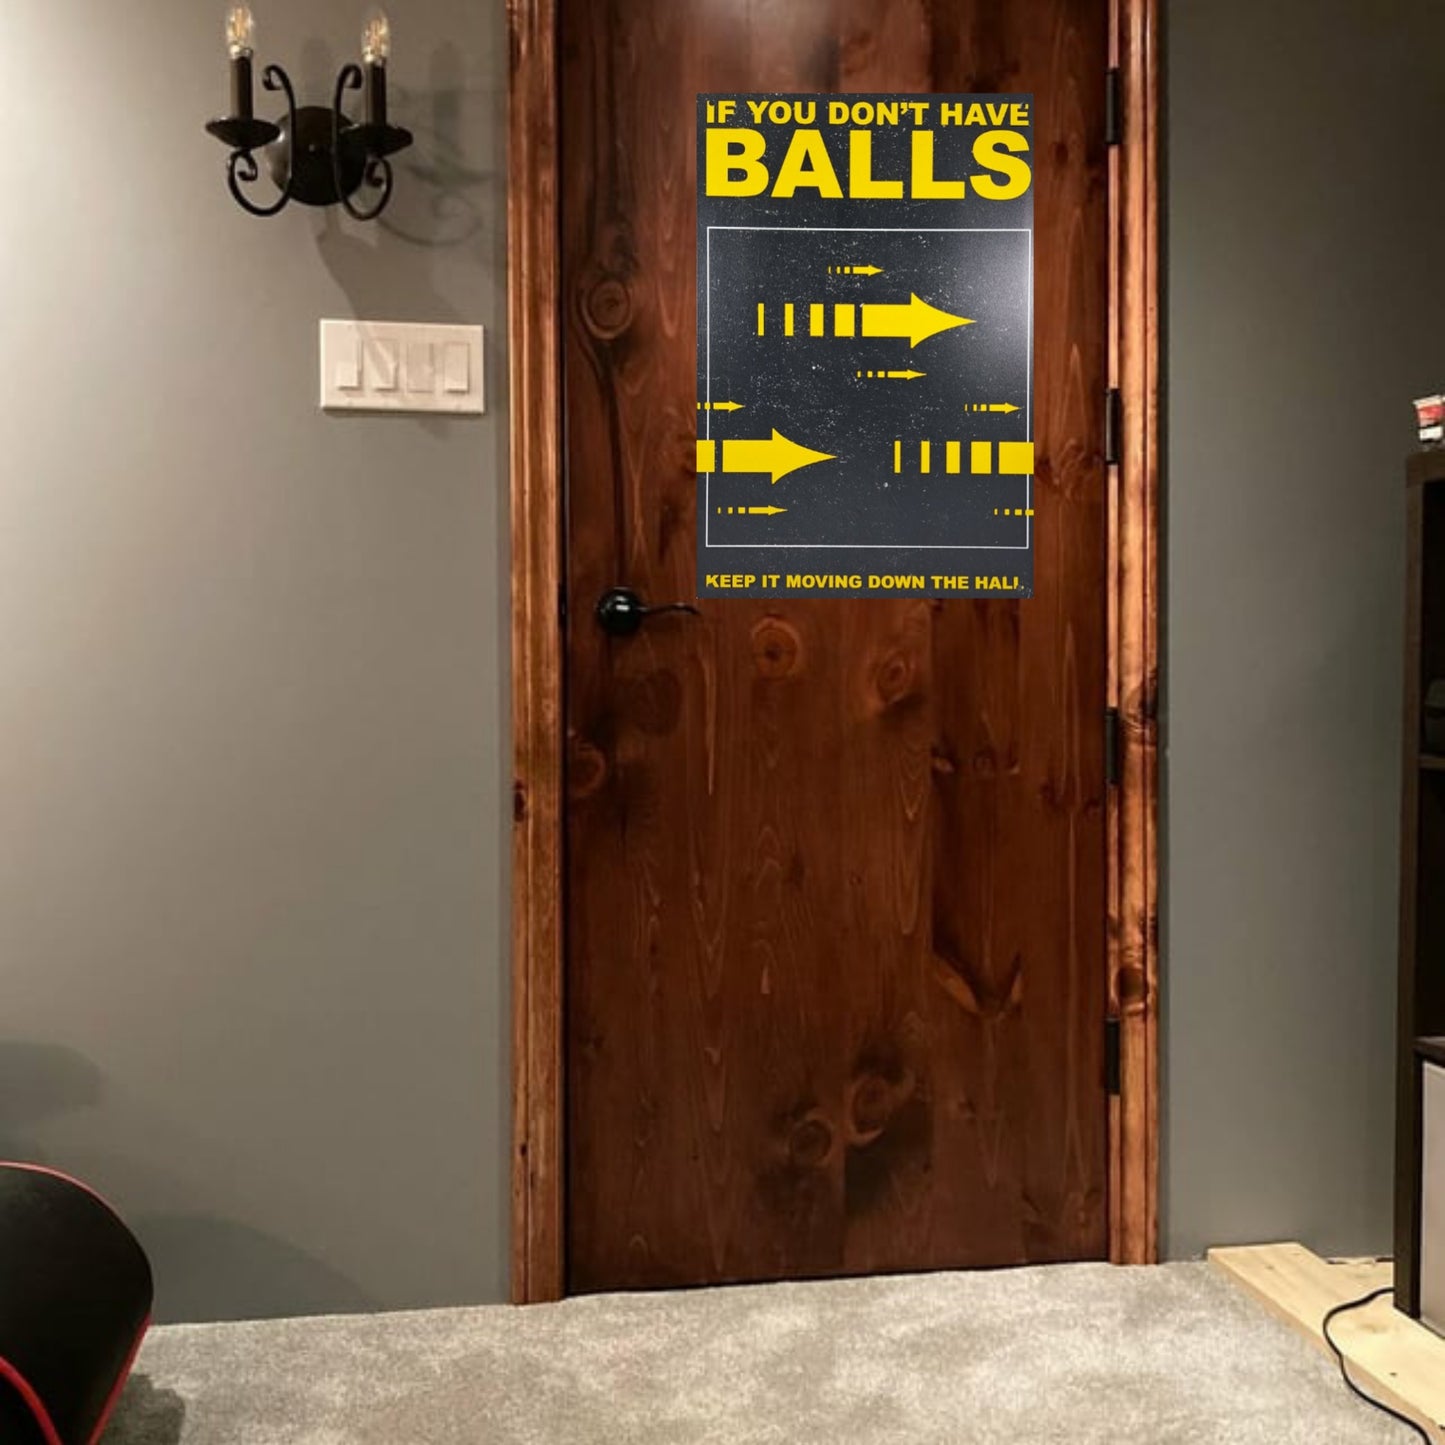 If You Don't Have Balls Keep Moving Down the Hall 12" x 8" Funny Tin Sign Man Cave Garage Home Sports Bar Pub Decor